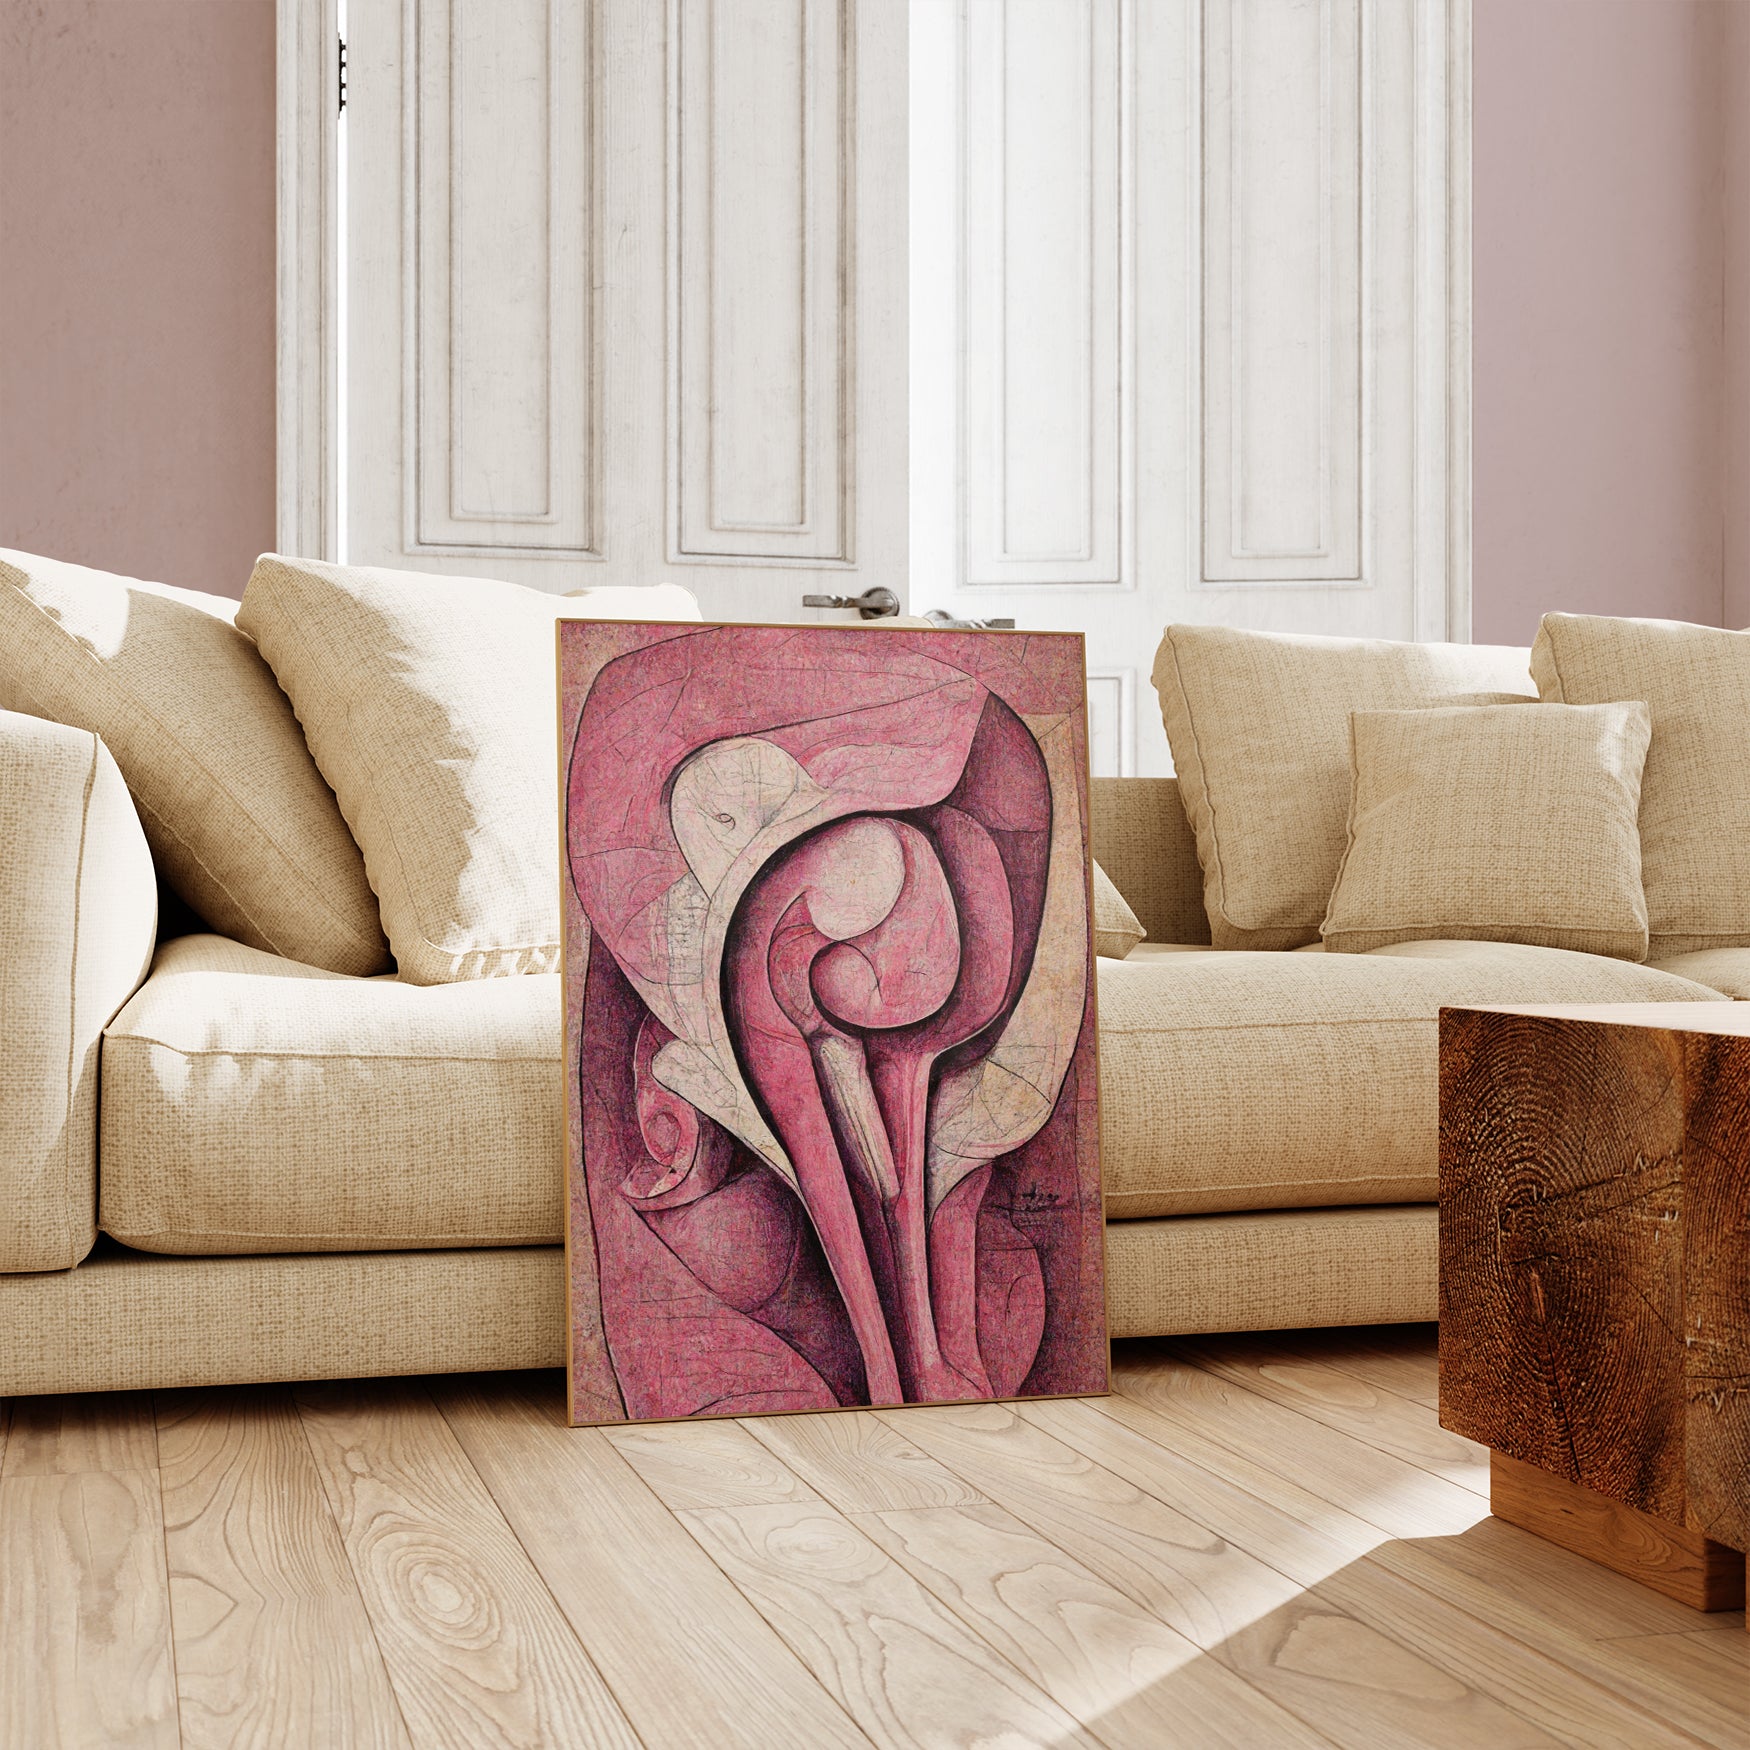 Medical Artwork for Gynecologists - Unique and informative decor showcasing the female reproductive system.